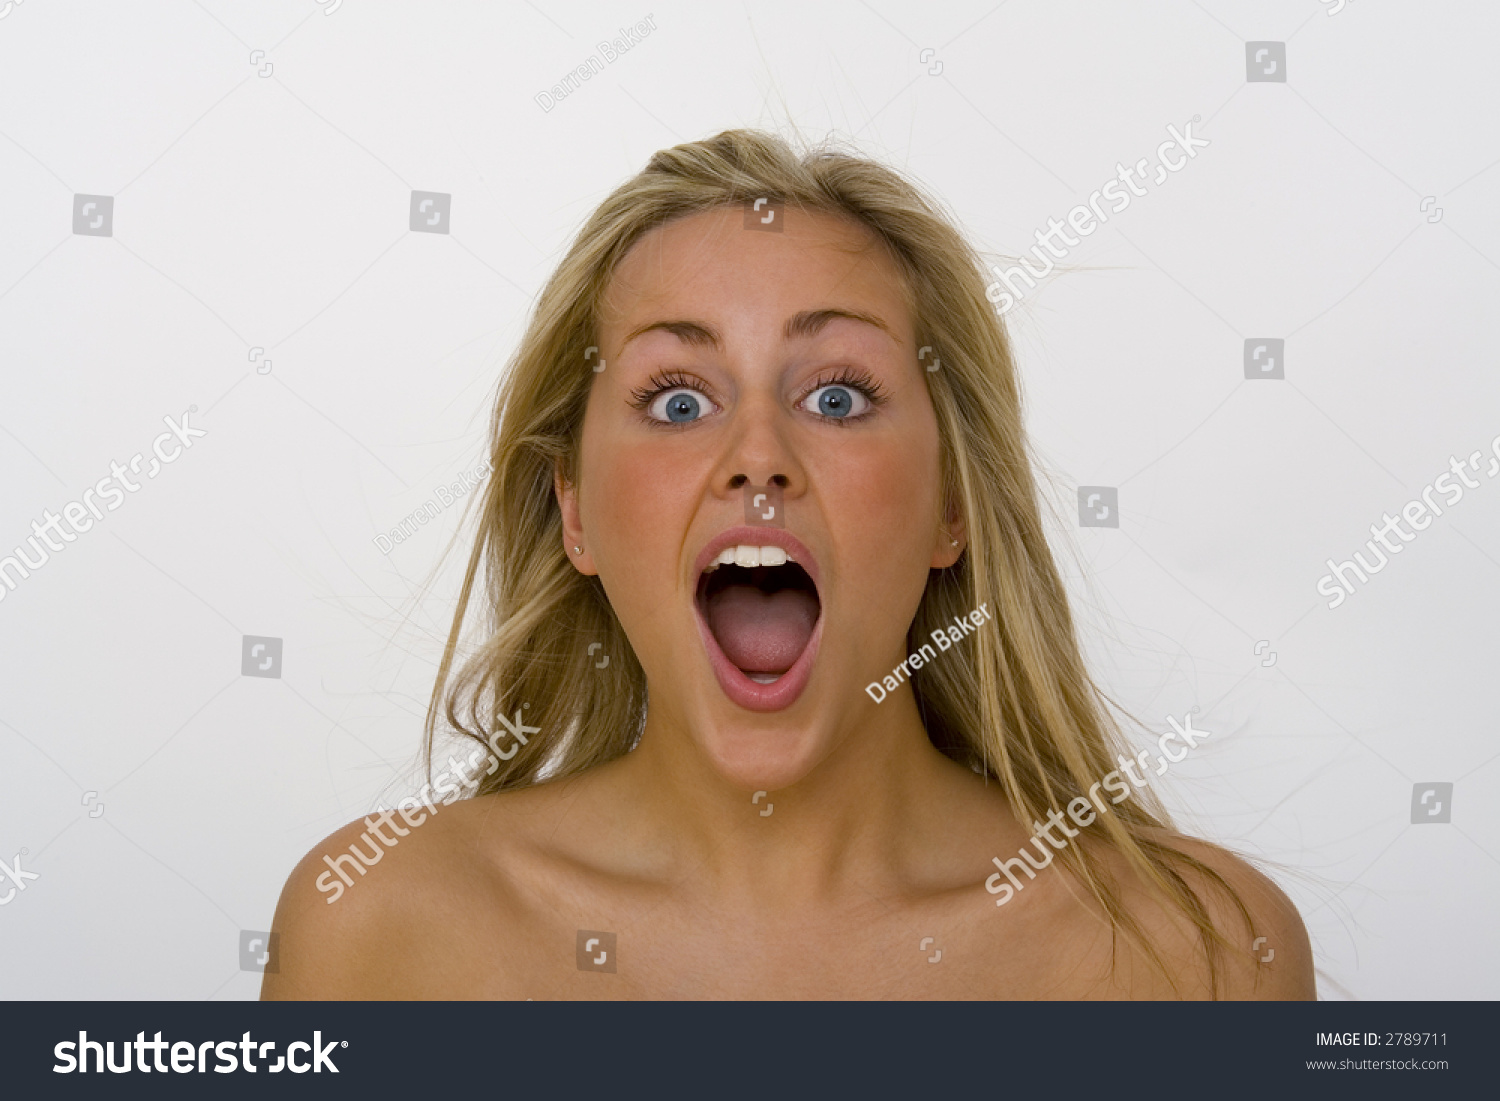 Woman With Mouth Open 9